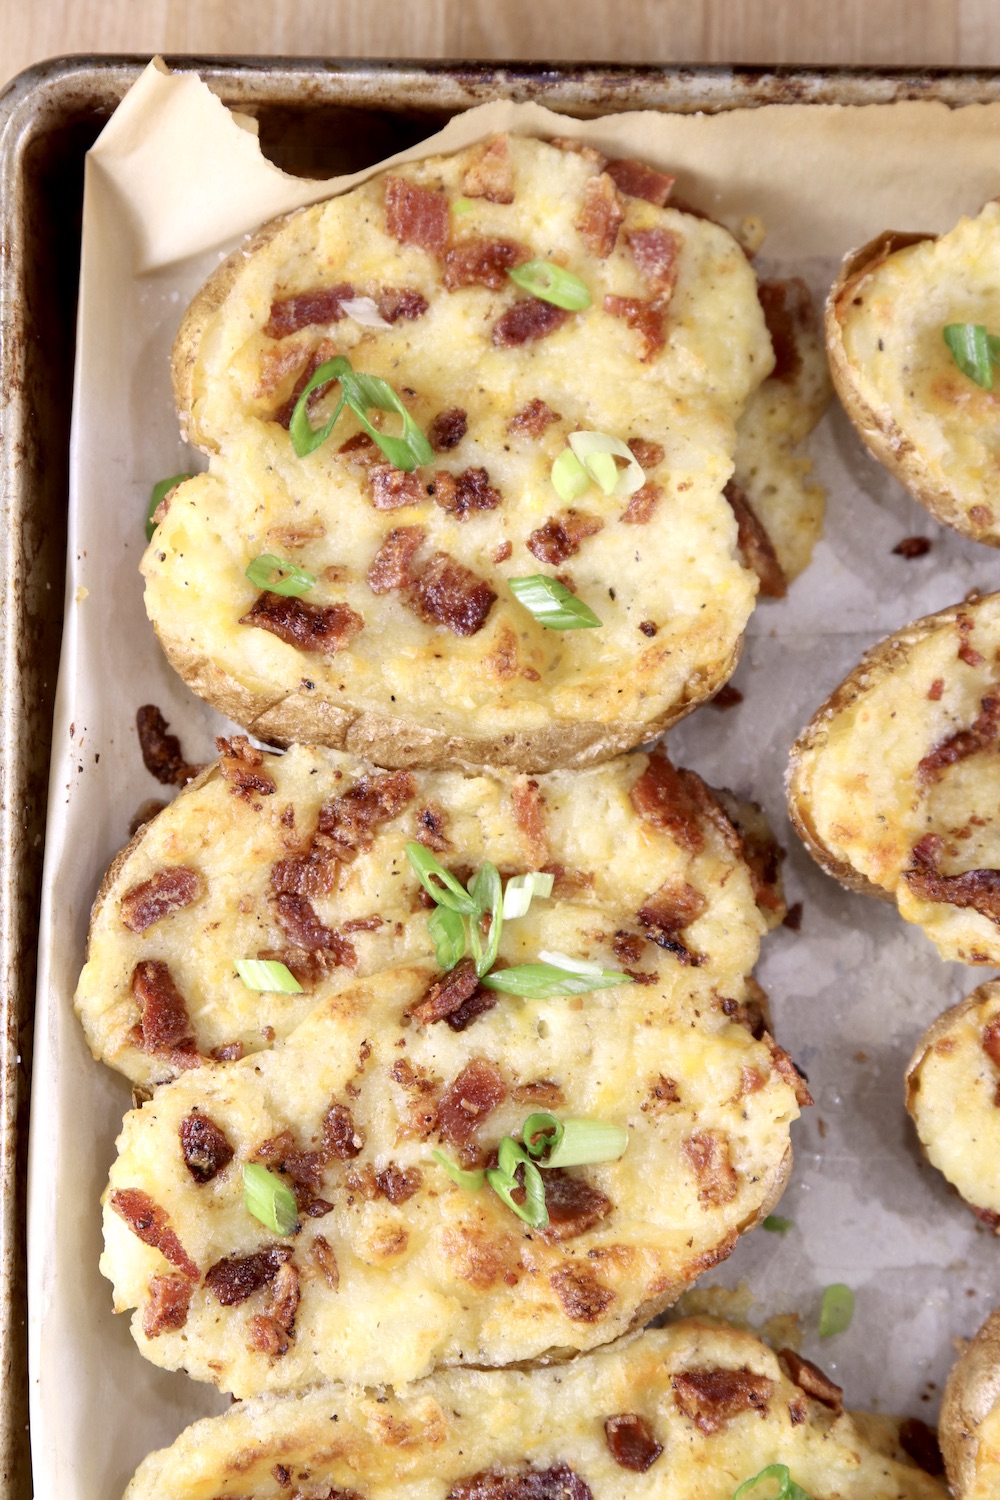 Bacon and cheese twice baked potatoes